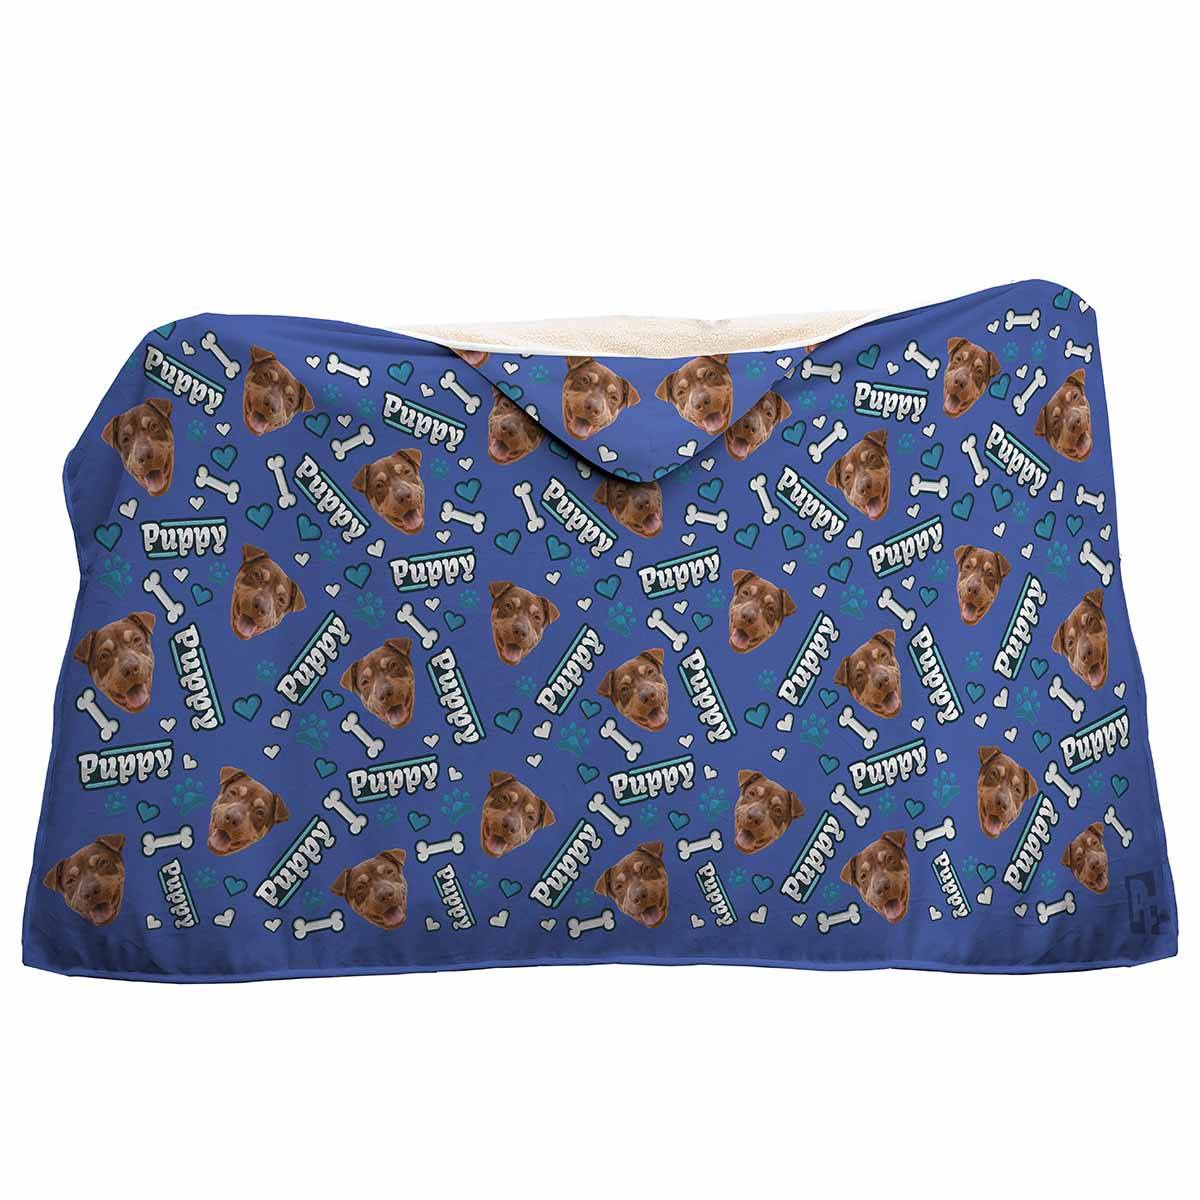 darkblue Puppy hooded blanket personalized with photo of face printed on it